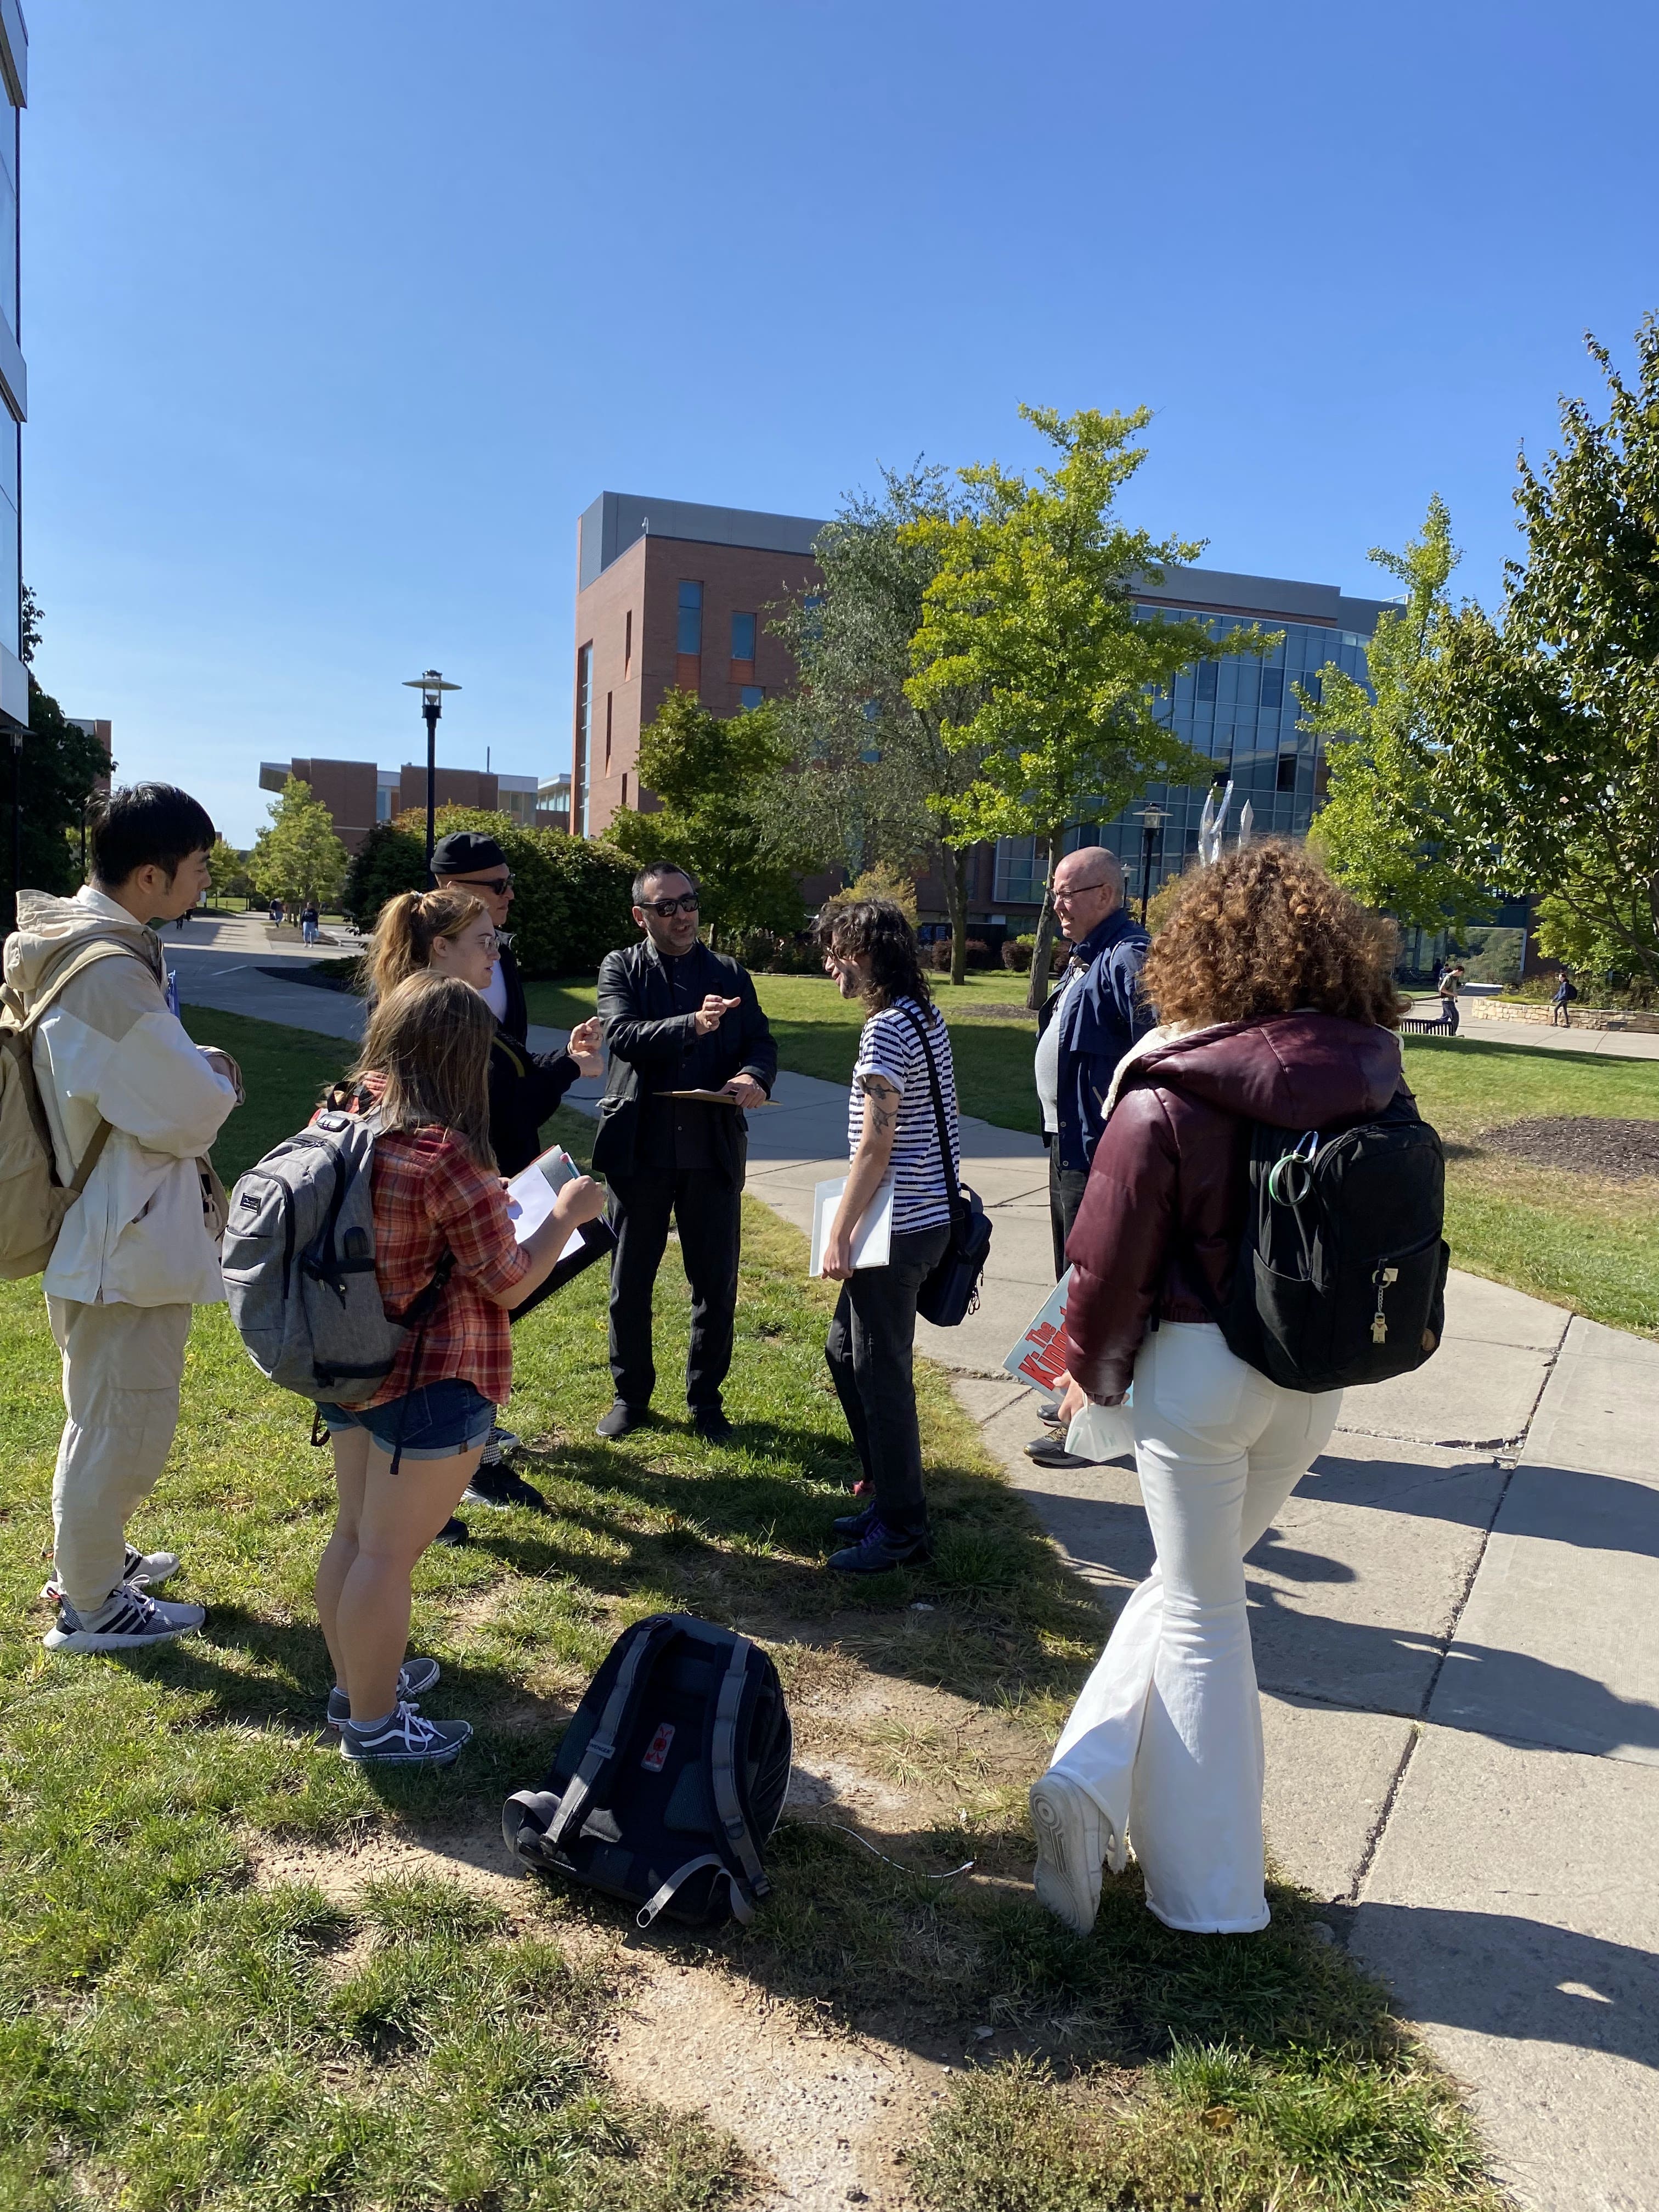 Students and Professors discussing outdoors on campus.